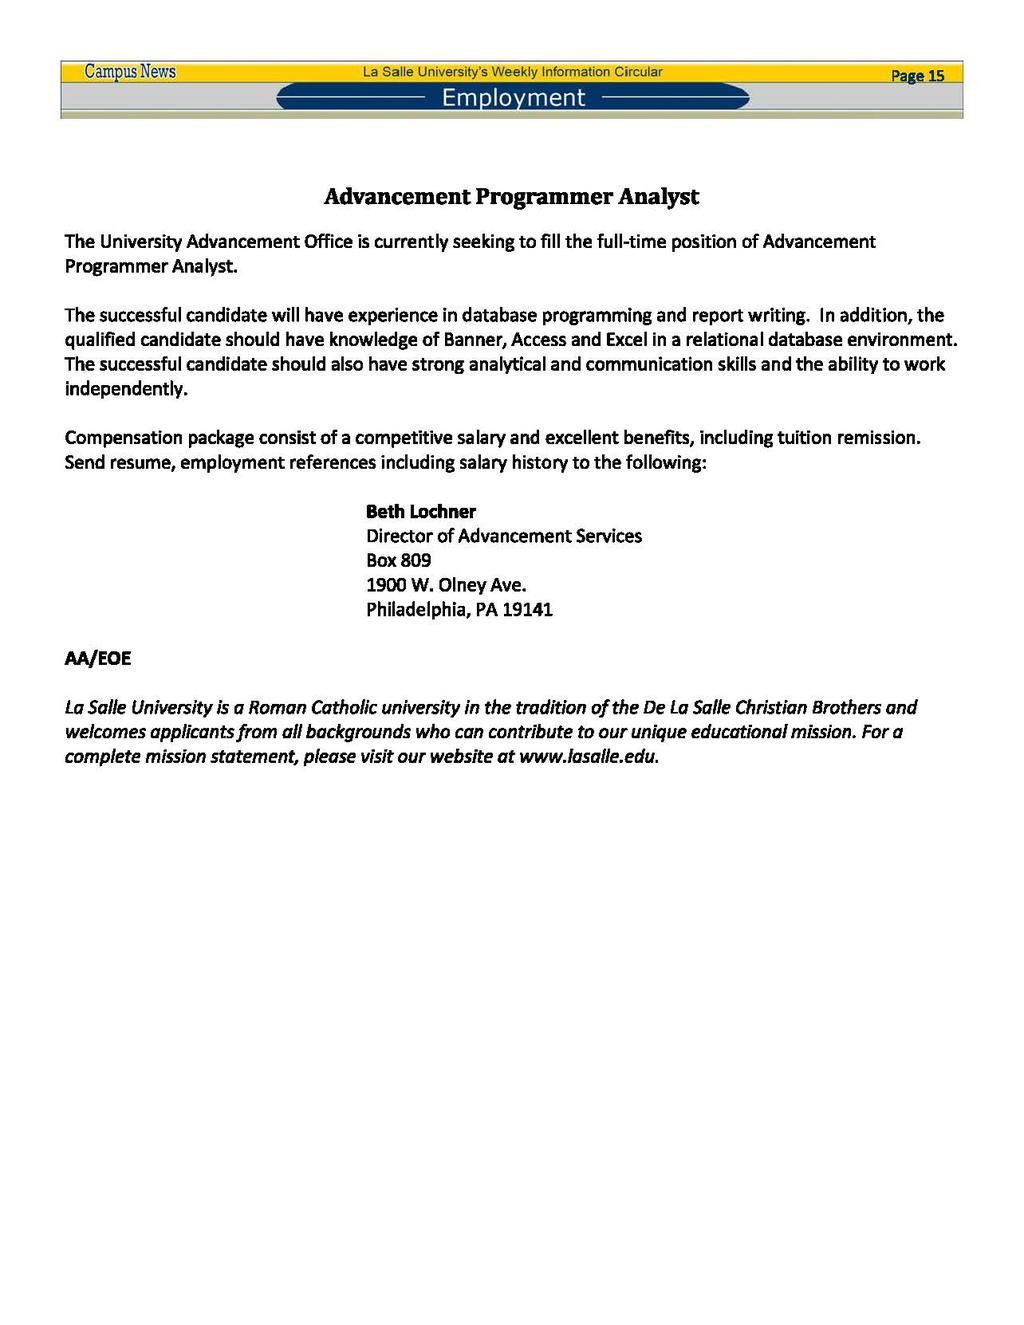 Em lo ment Pa e15 Advancement Programmer Analyst The University Advancement Office is currently seeking to fill the full-time position of Advancement Programmer Analyst.